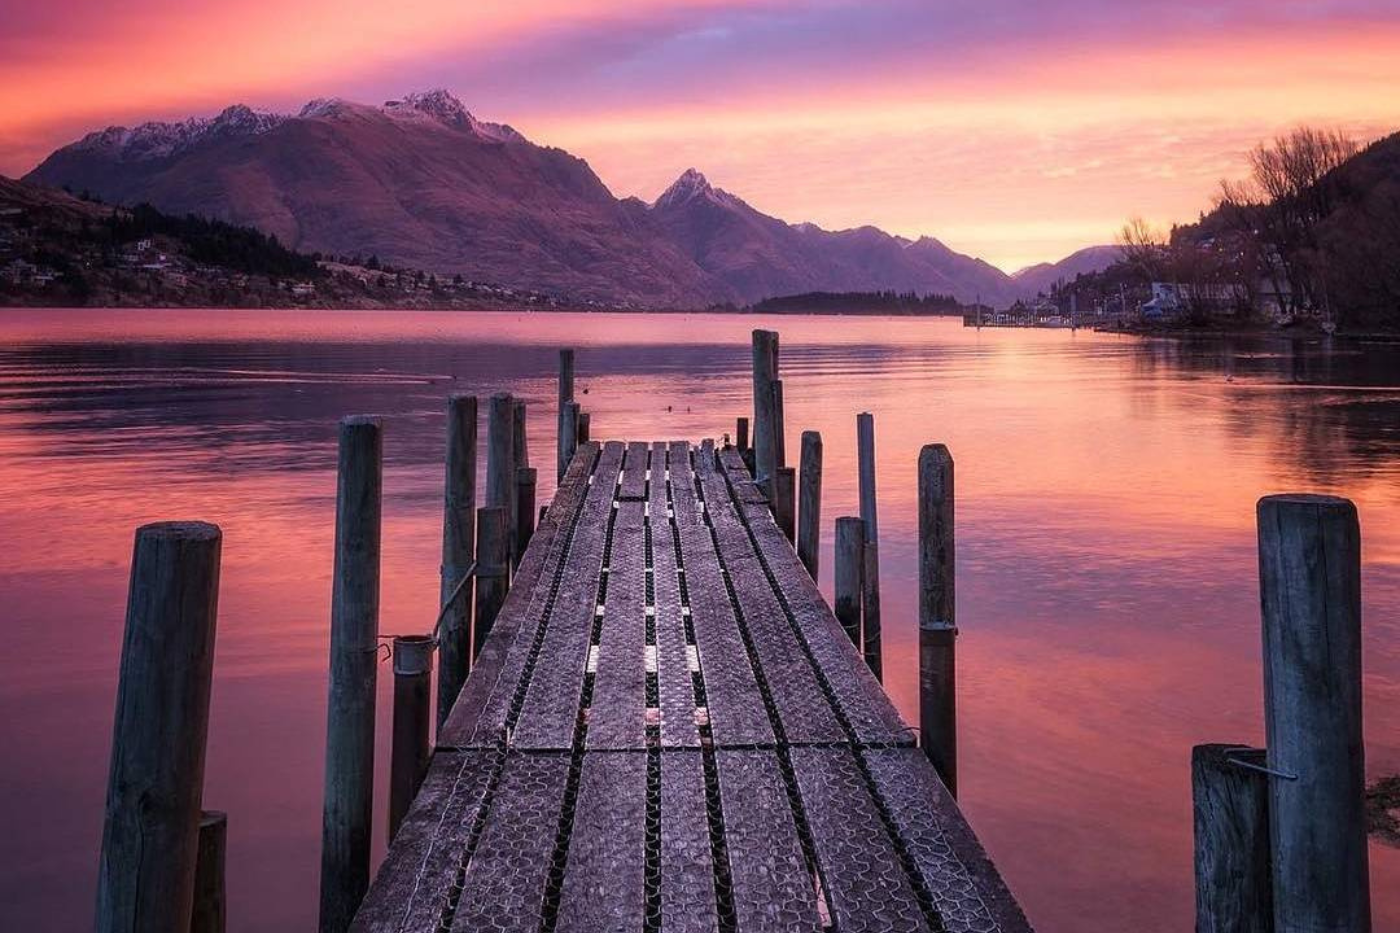 Pink and purple sunrise on lake with jetty in forefront